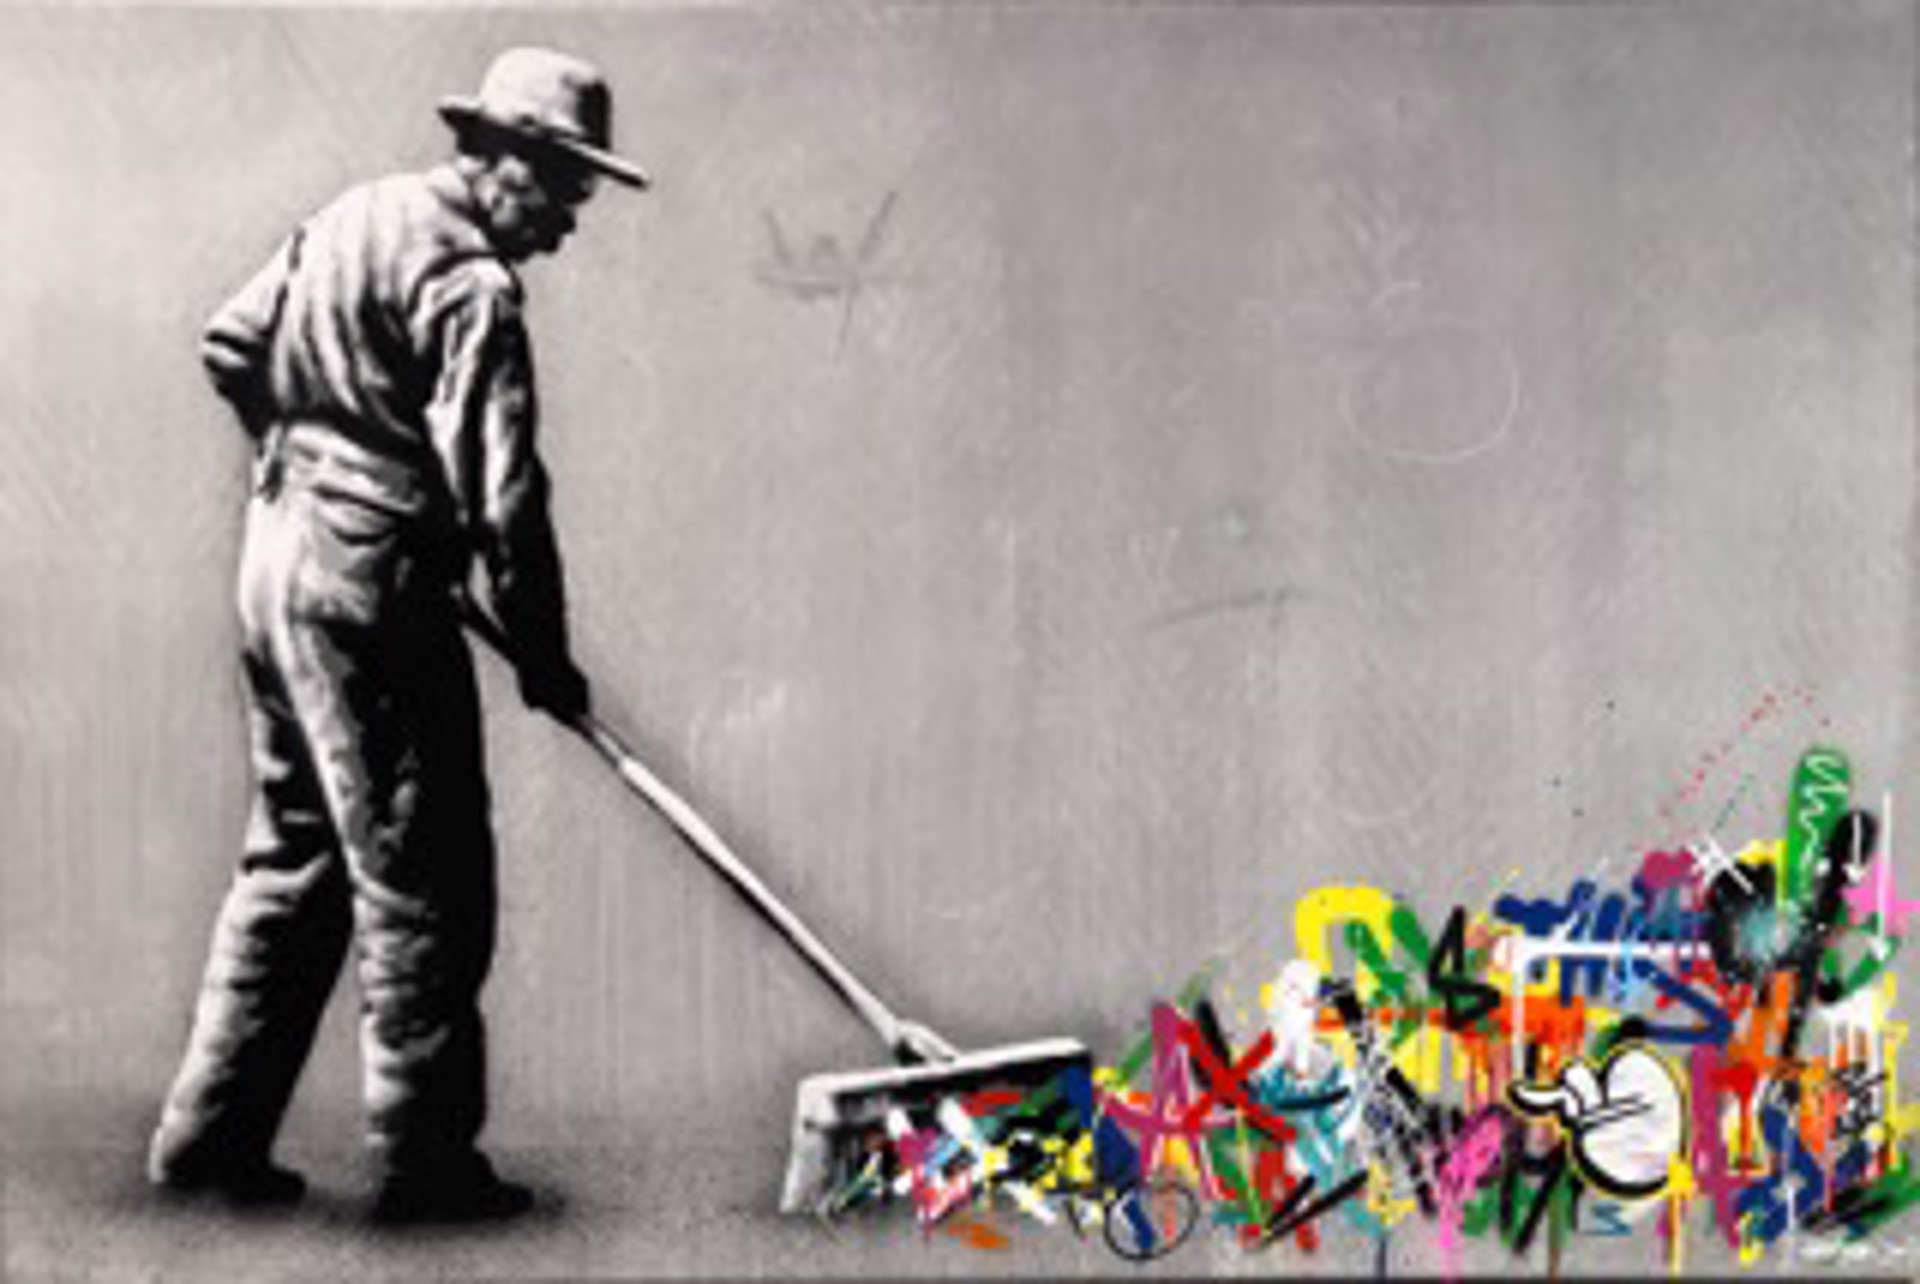 Sweeper by Martin Whatson